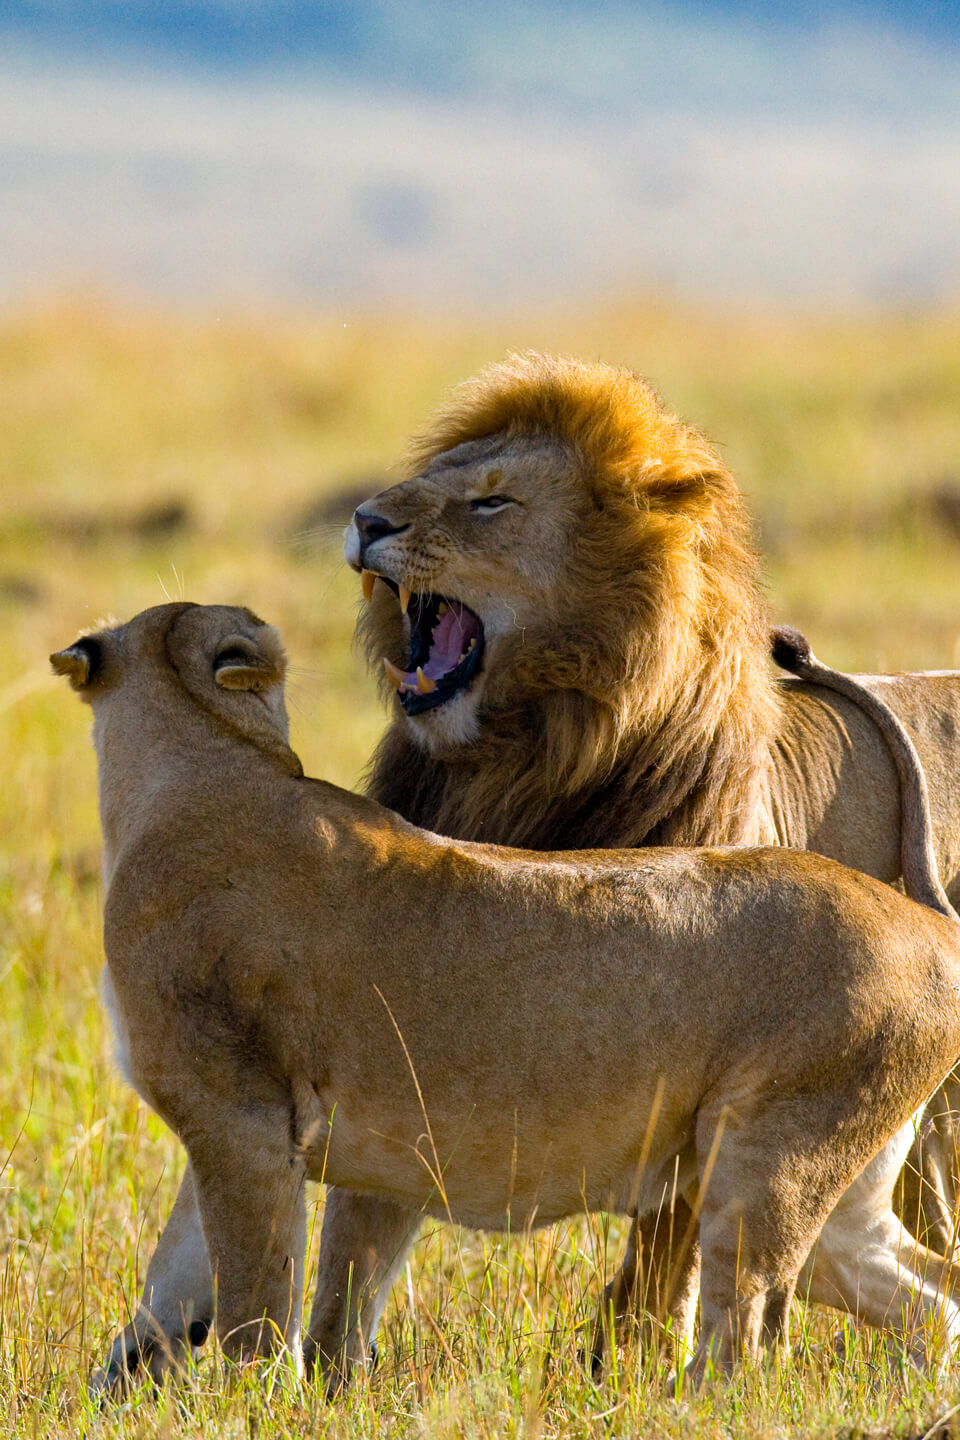 Lion and lioness in Queen Elizabeth National Park